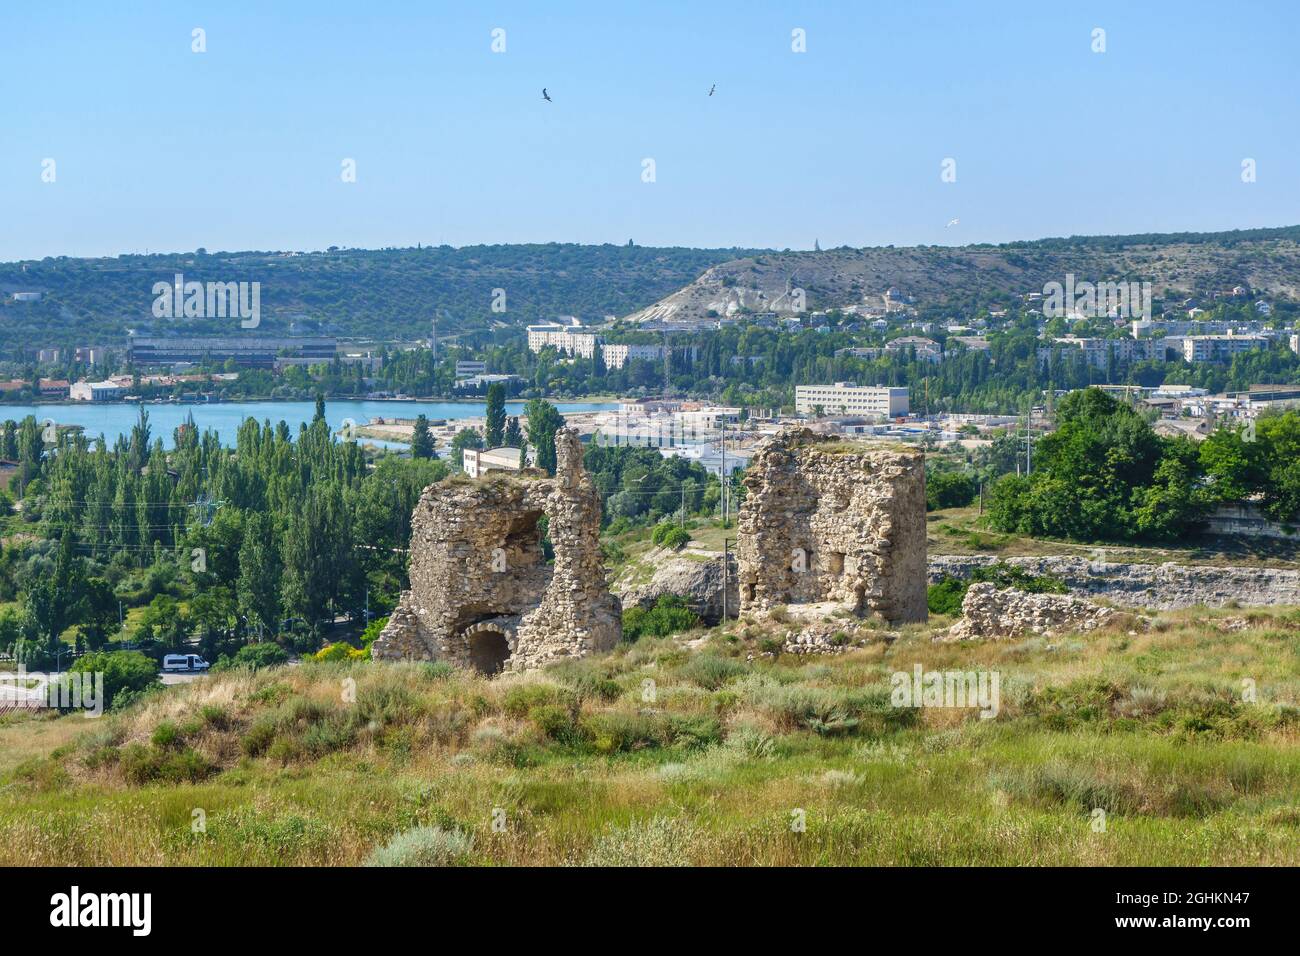 Panorama of medieval towers of Kalamita, fortress founded by Byzantines. It was built above cliff hiding cave church of St Clement. Modern city Inkerm Stock Photo